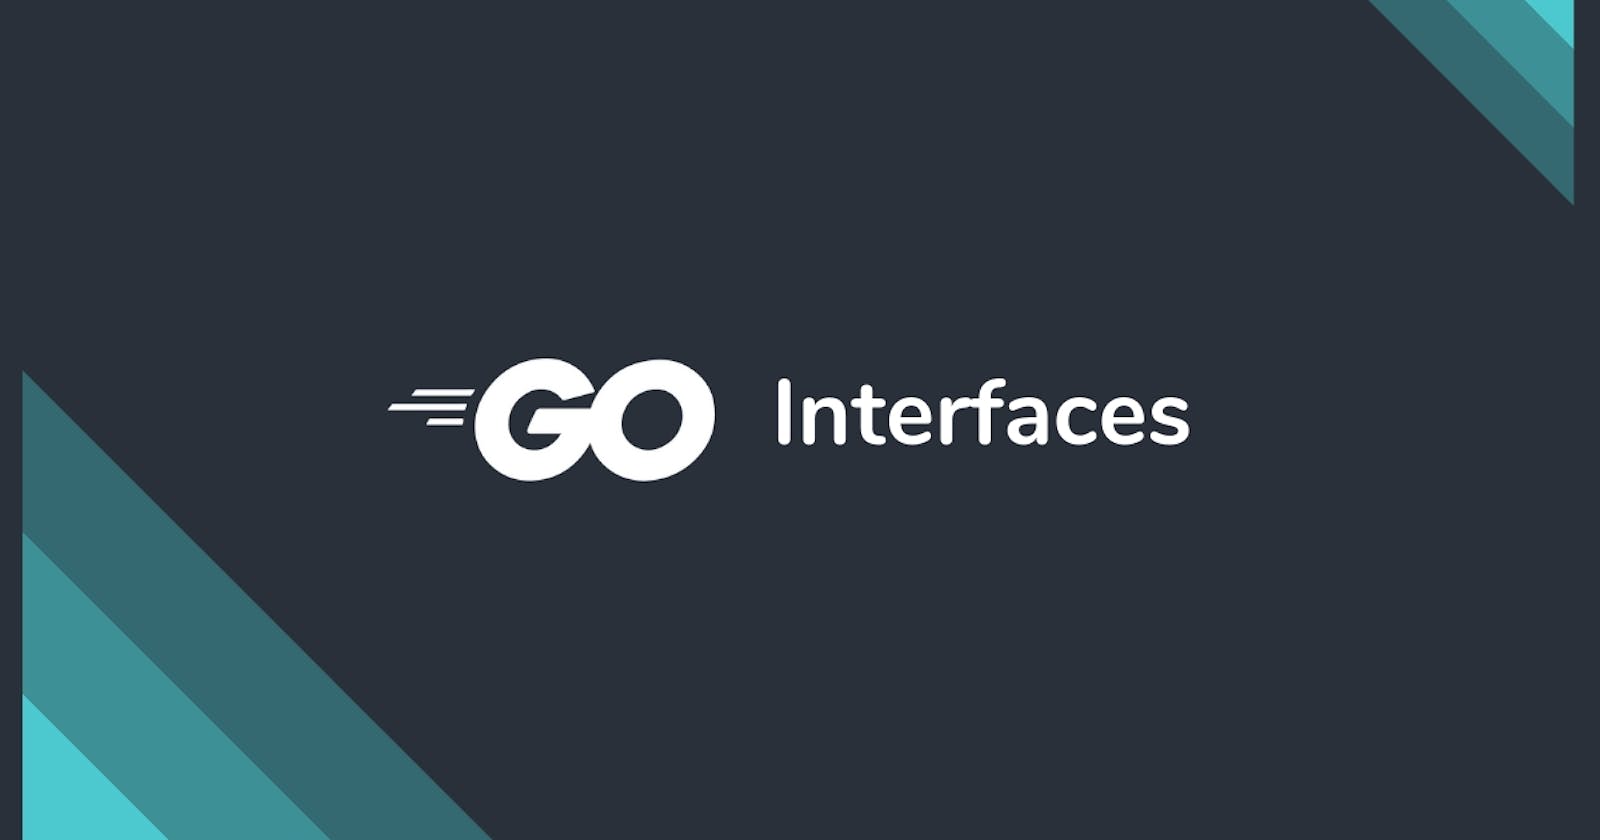 Interfaces in Go